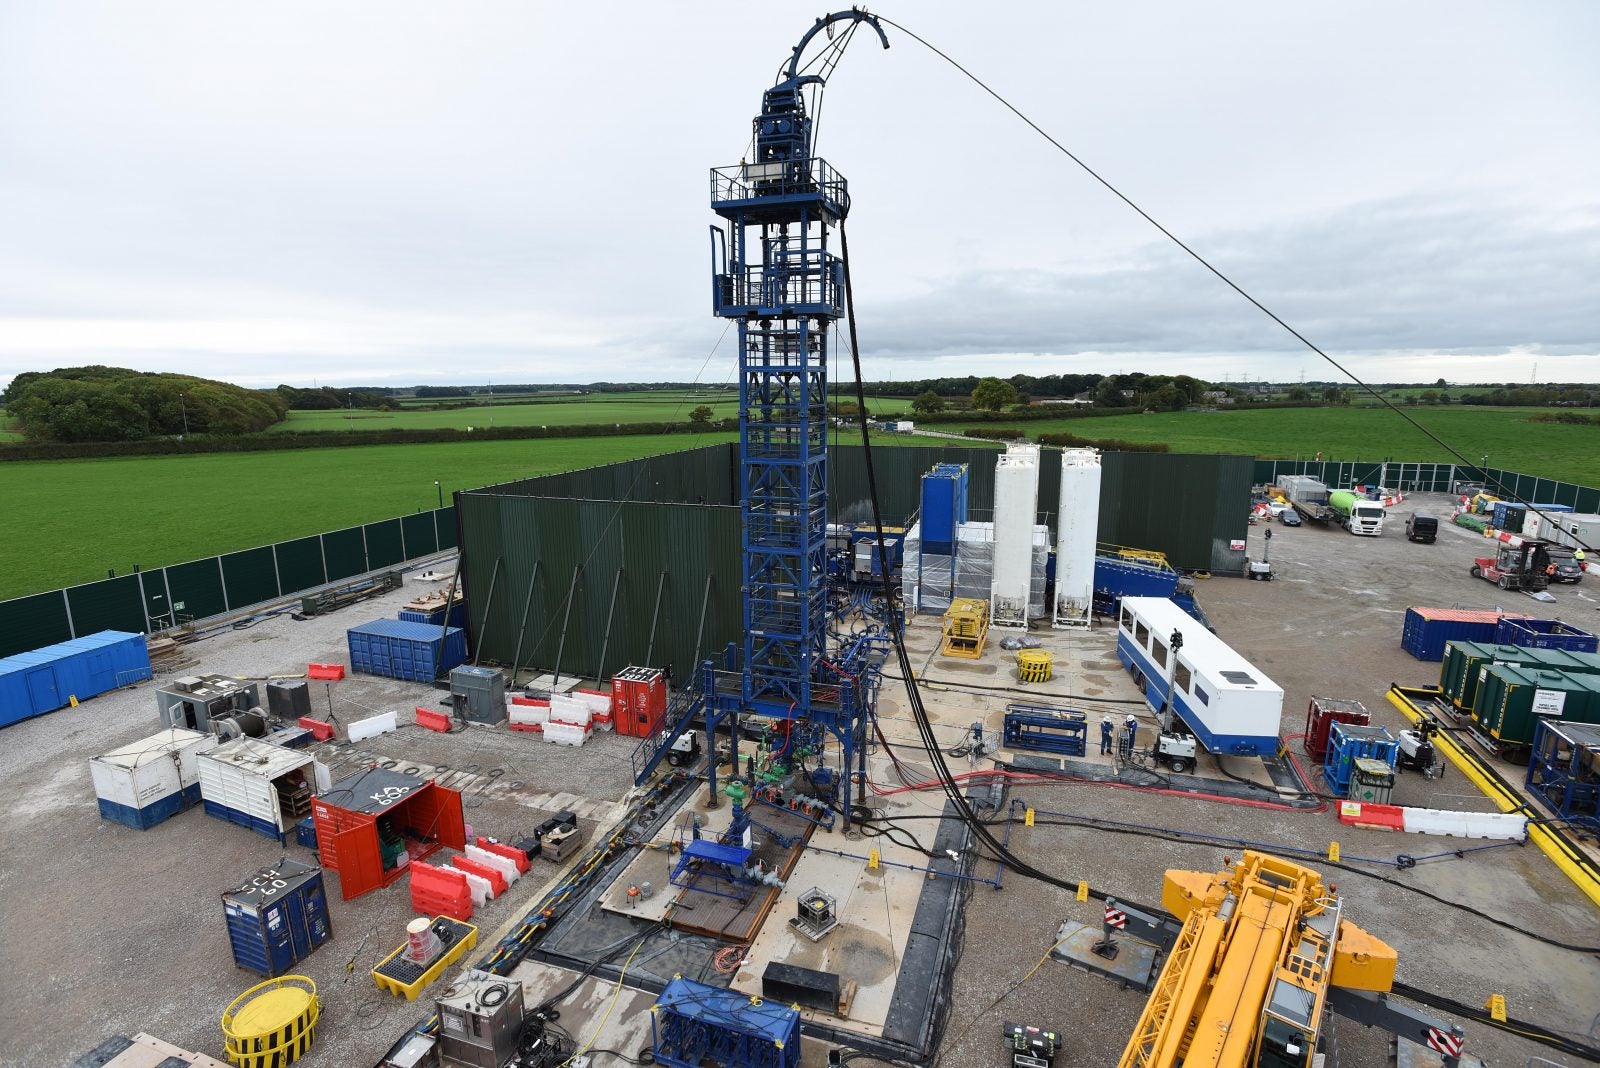 The ban on fracking has been lifted in England under Truss’ watch